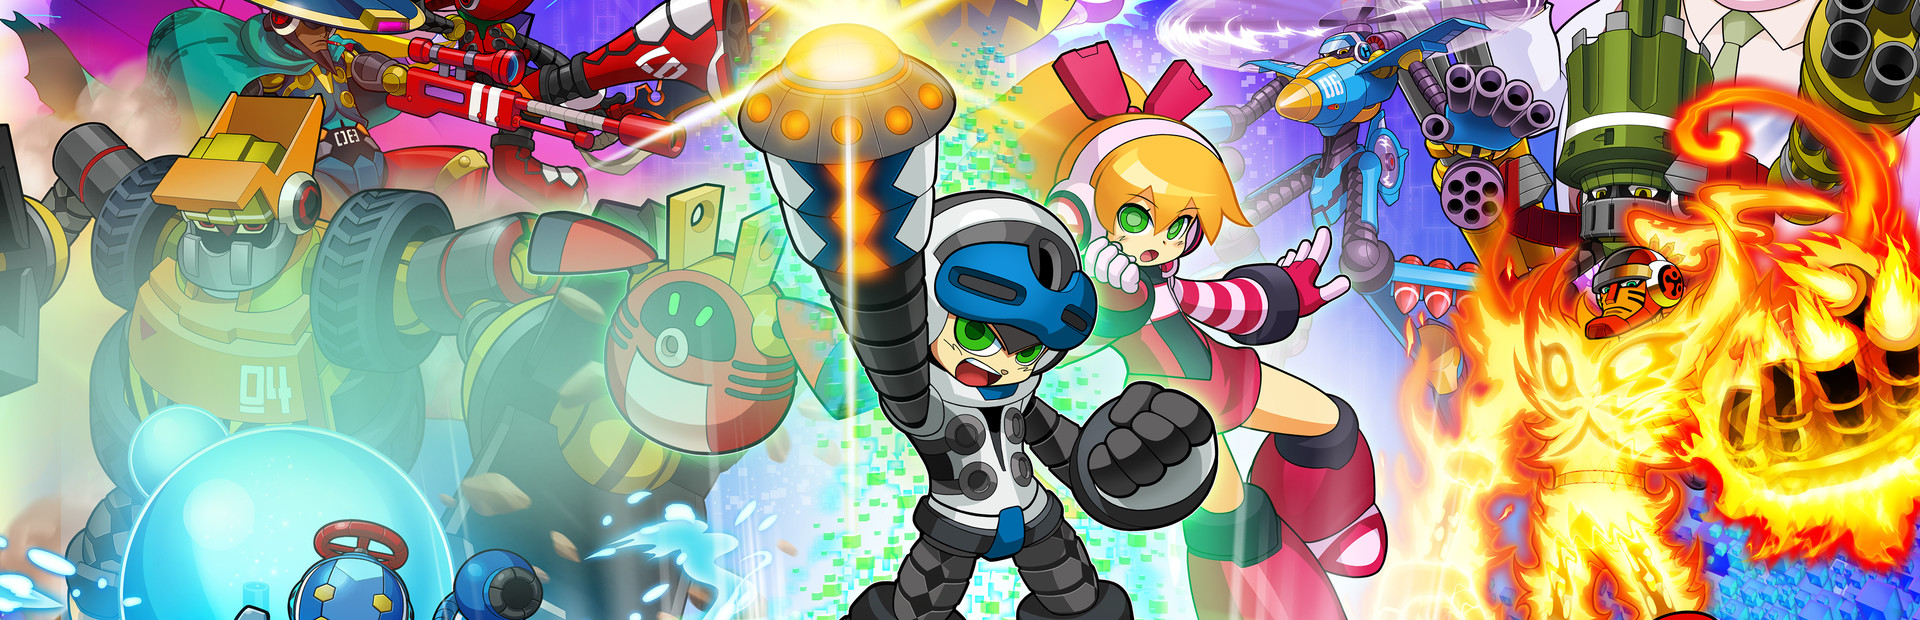 Mighty No. 9 cover image